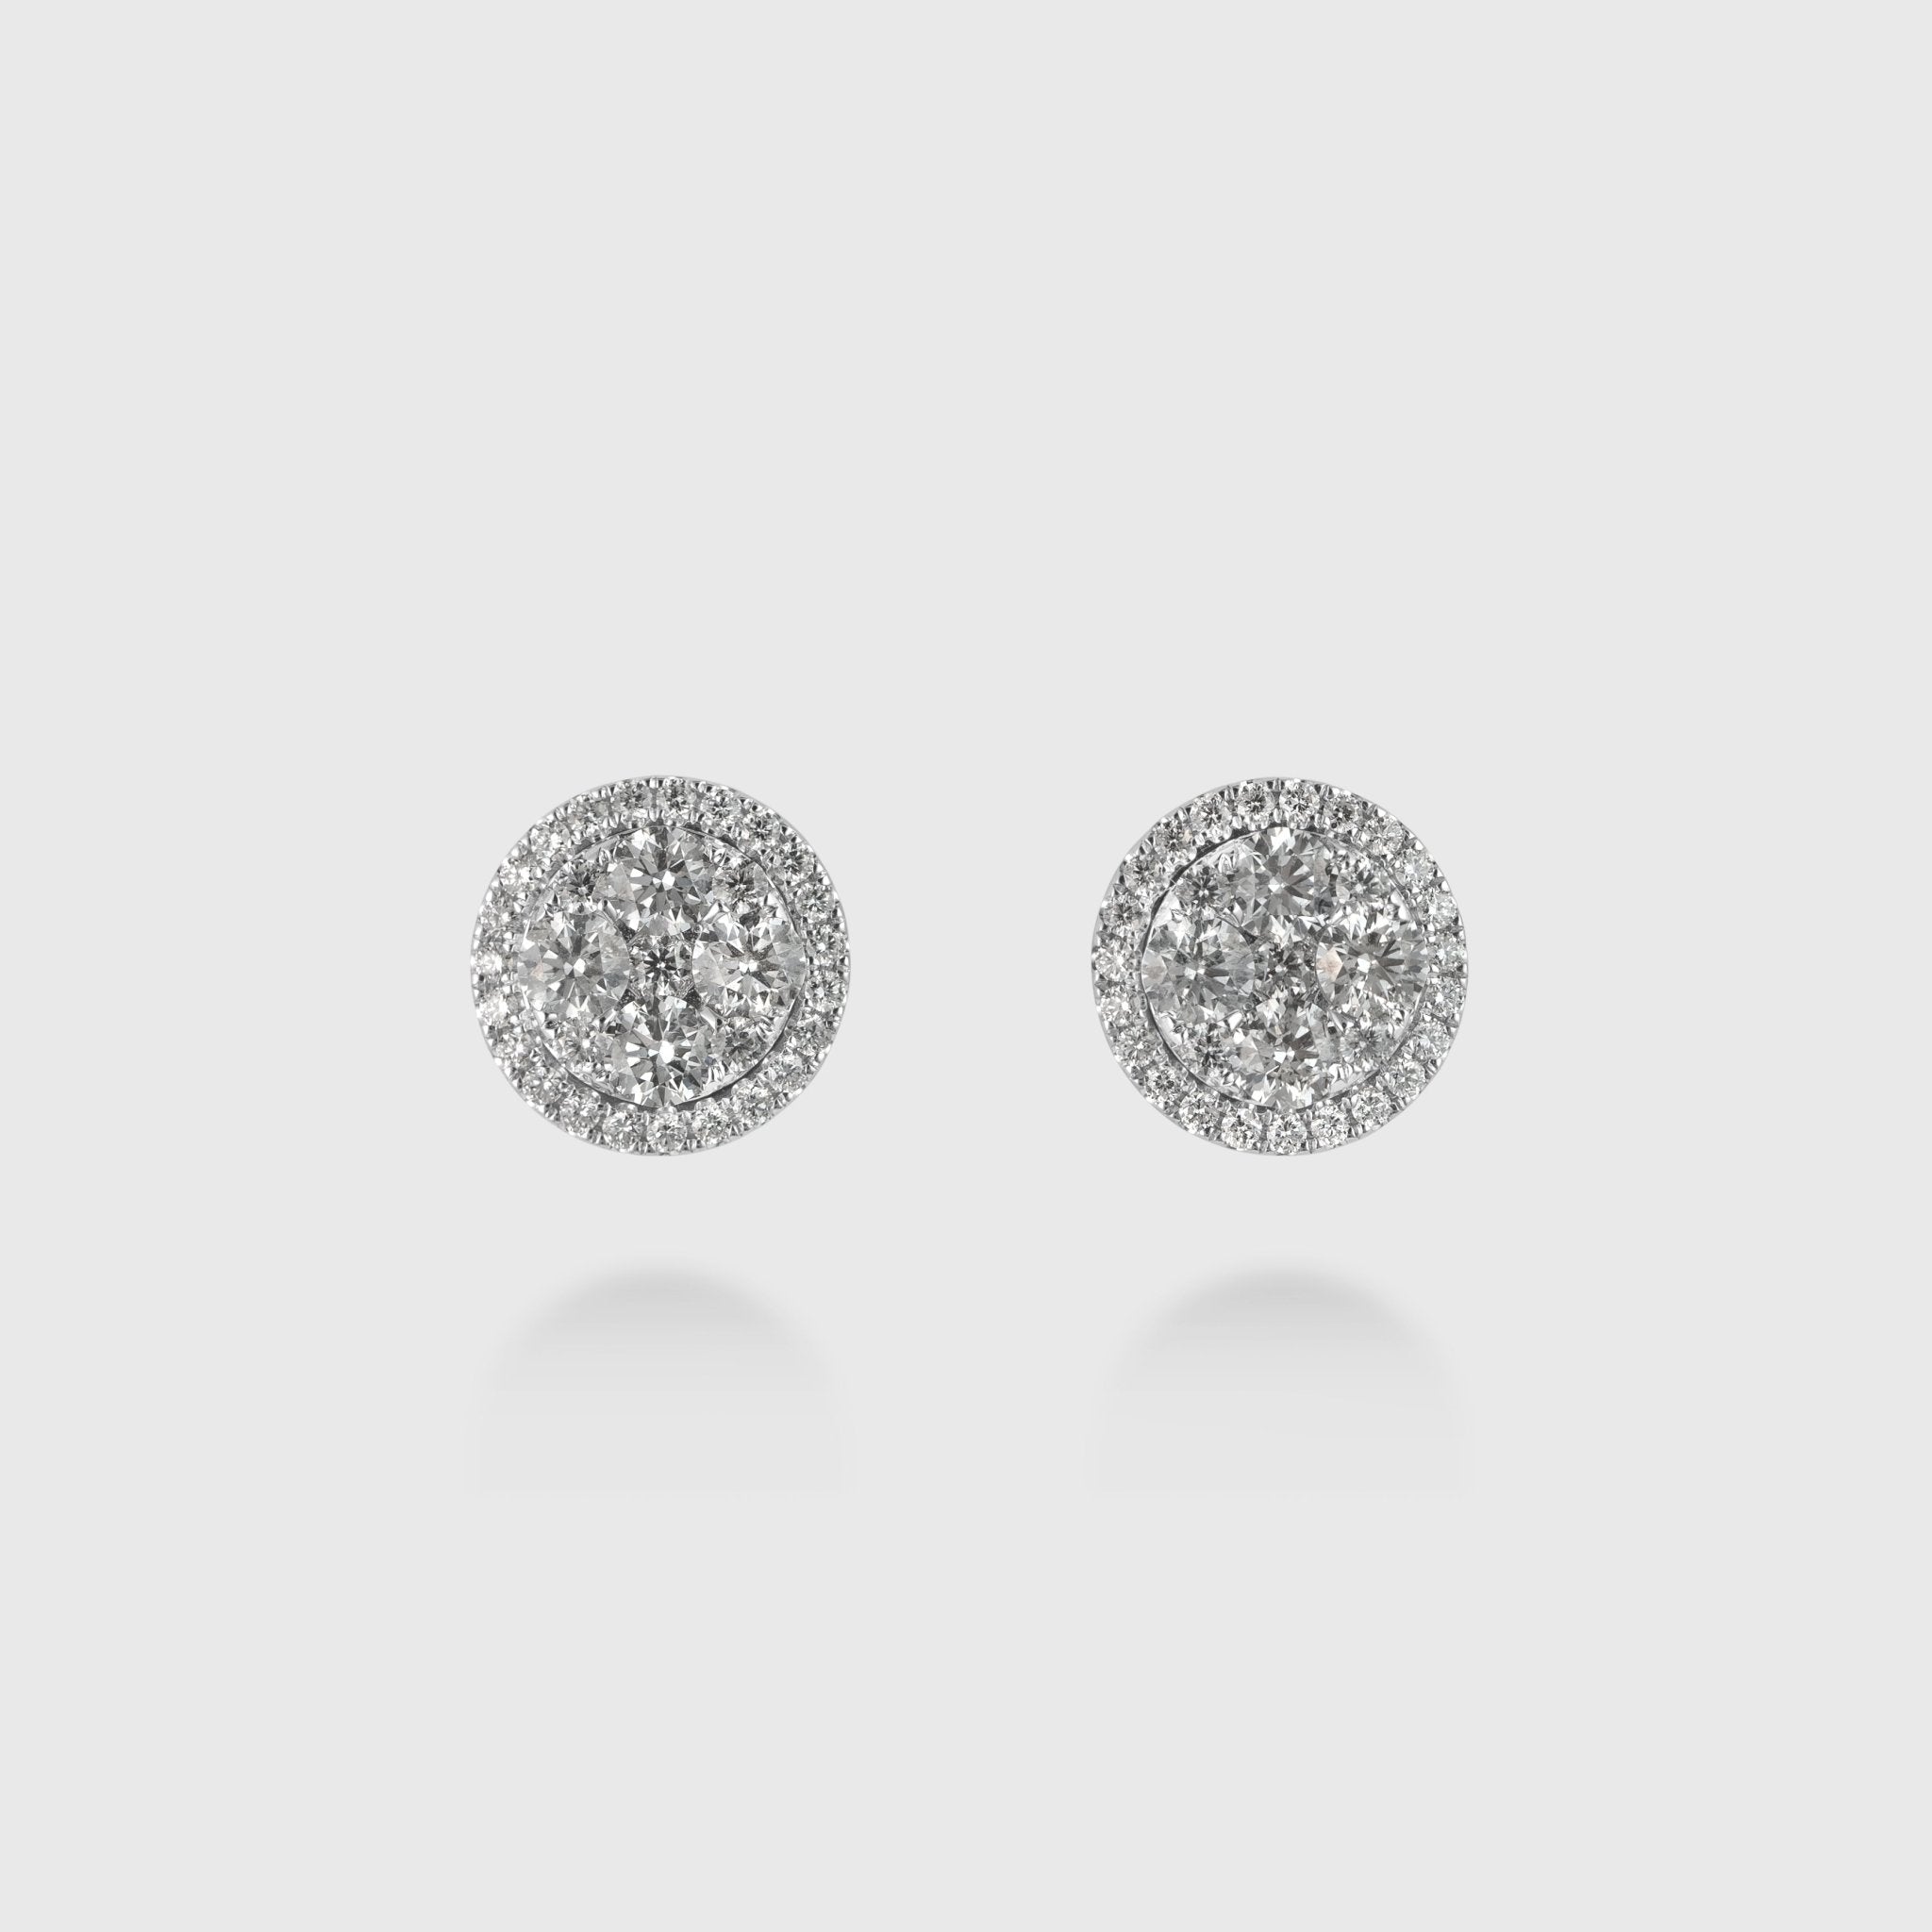 Round Cluster Stud Earrings with Halo - Earrings - Leviev Diamonds